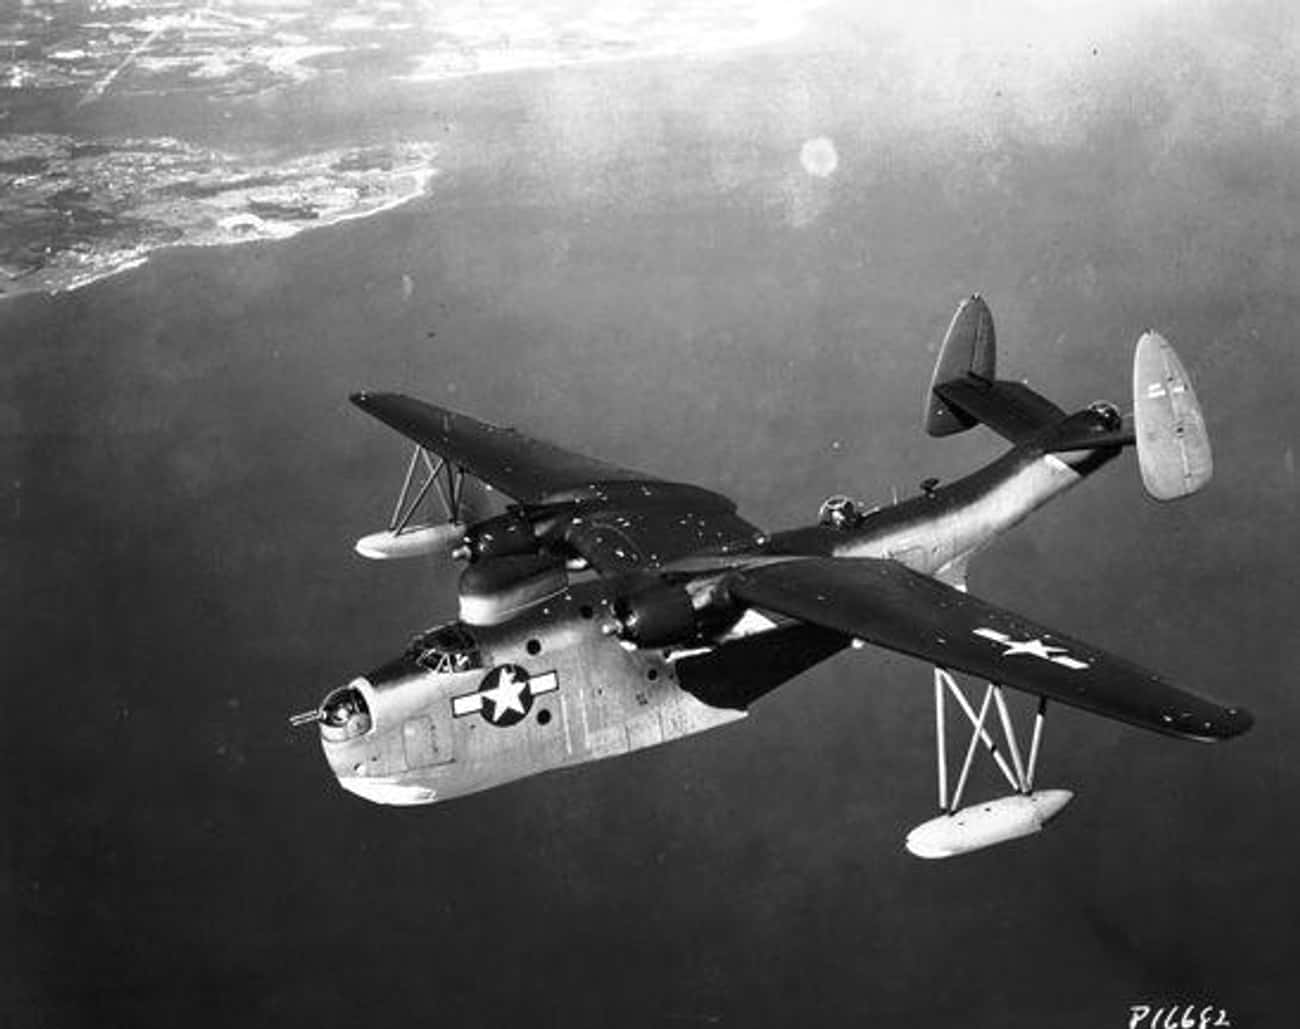 Five US Navy Torpedo Bombers Disappeared on Flight 19